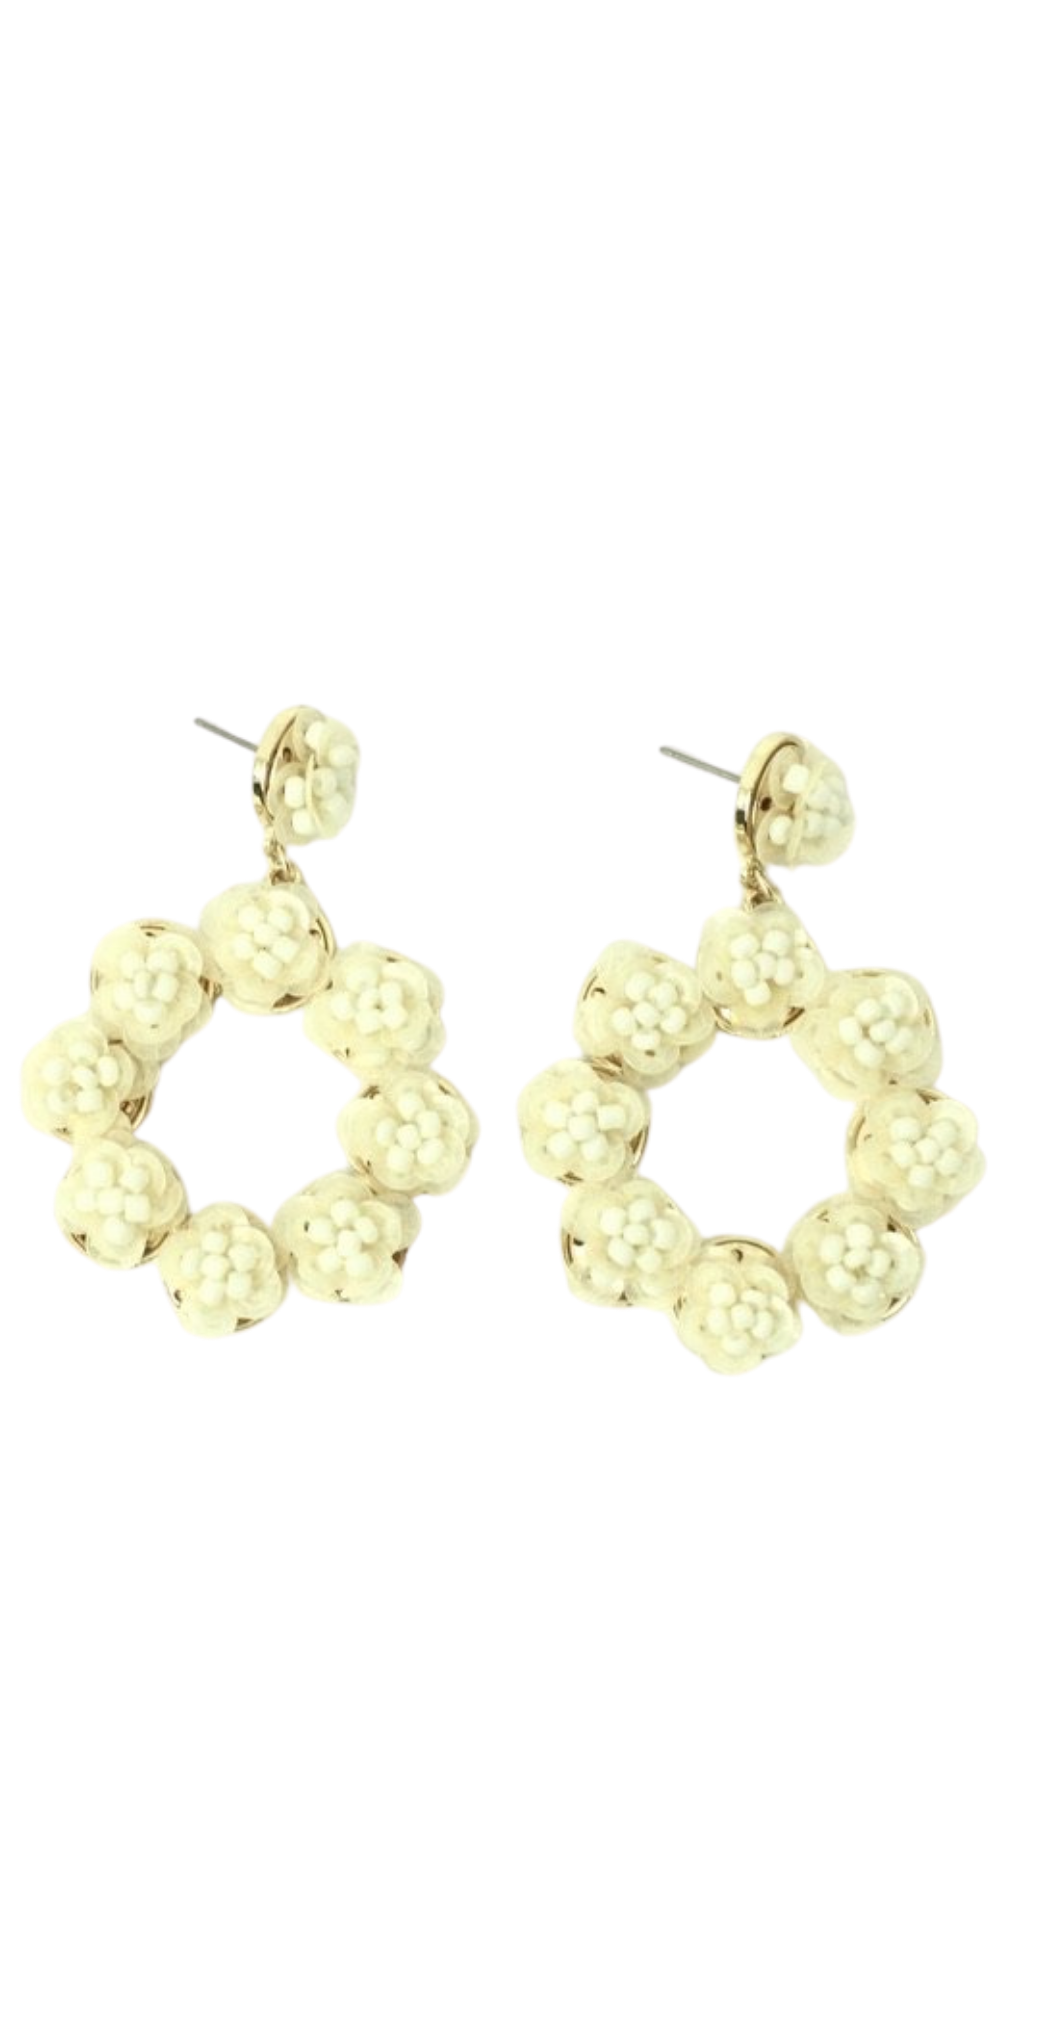 White and Gold Flower Dangle Earrings - The Fashion Foundation - {{ discount designer}}